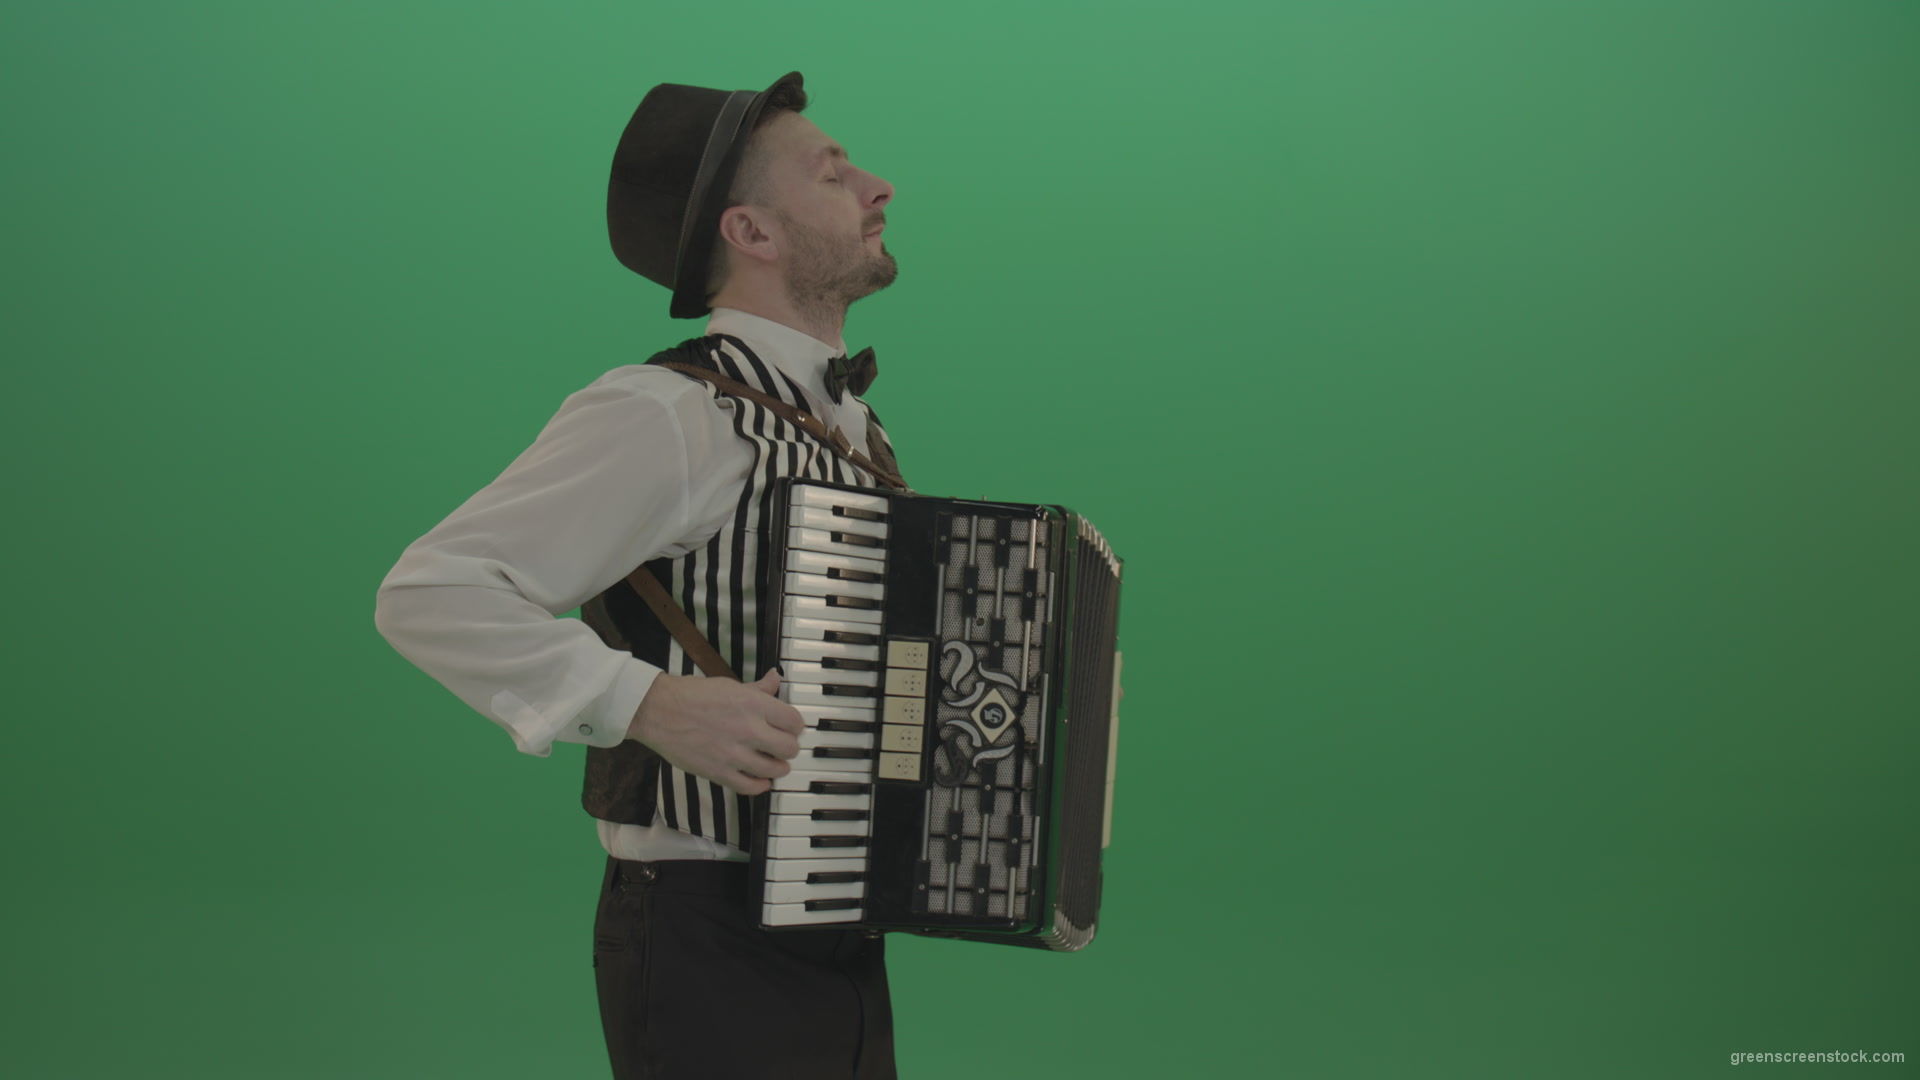 Man-in-hat-playing-Accordion-jazz-music-on-wedding-in-side-view-isolated-on-green-screen_007 Green Screen Stock